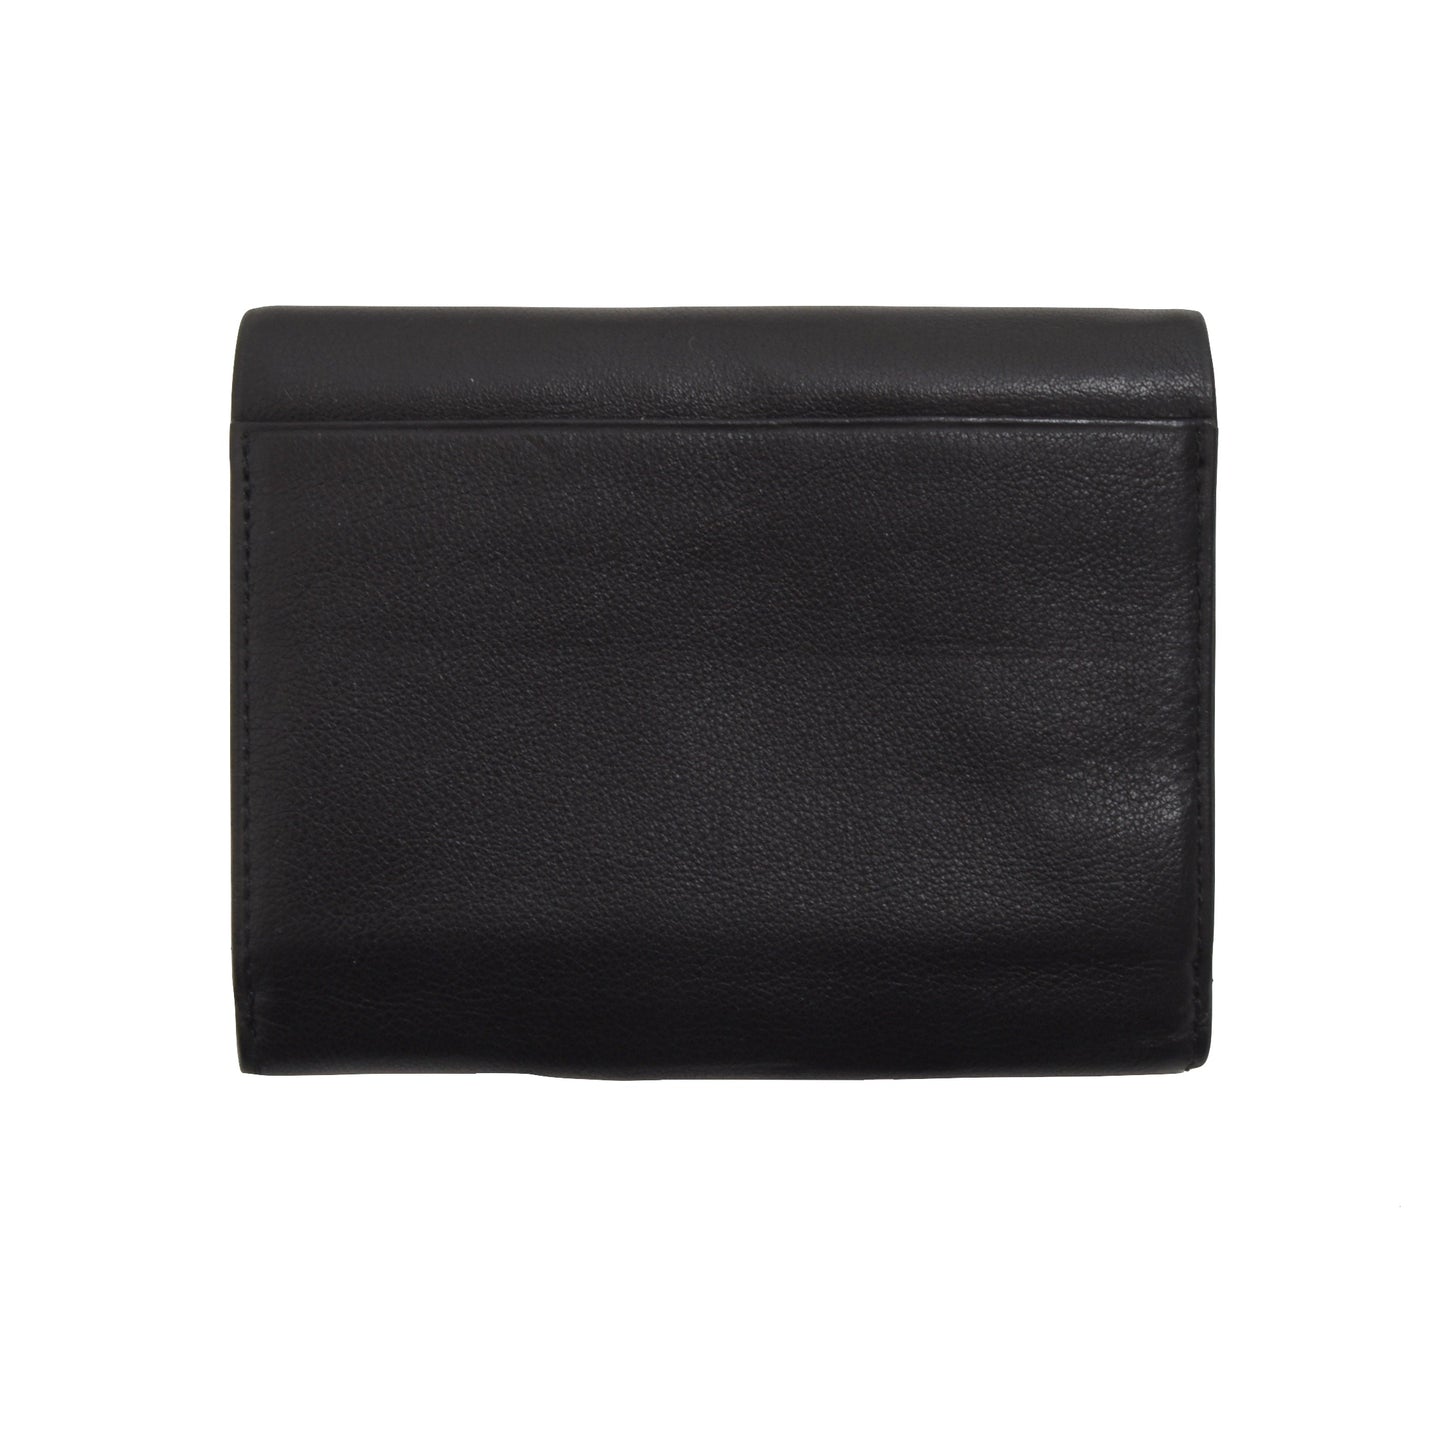 Creation Weiss Buffalo Leather Clasp Wallet - Black